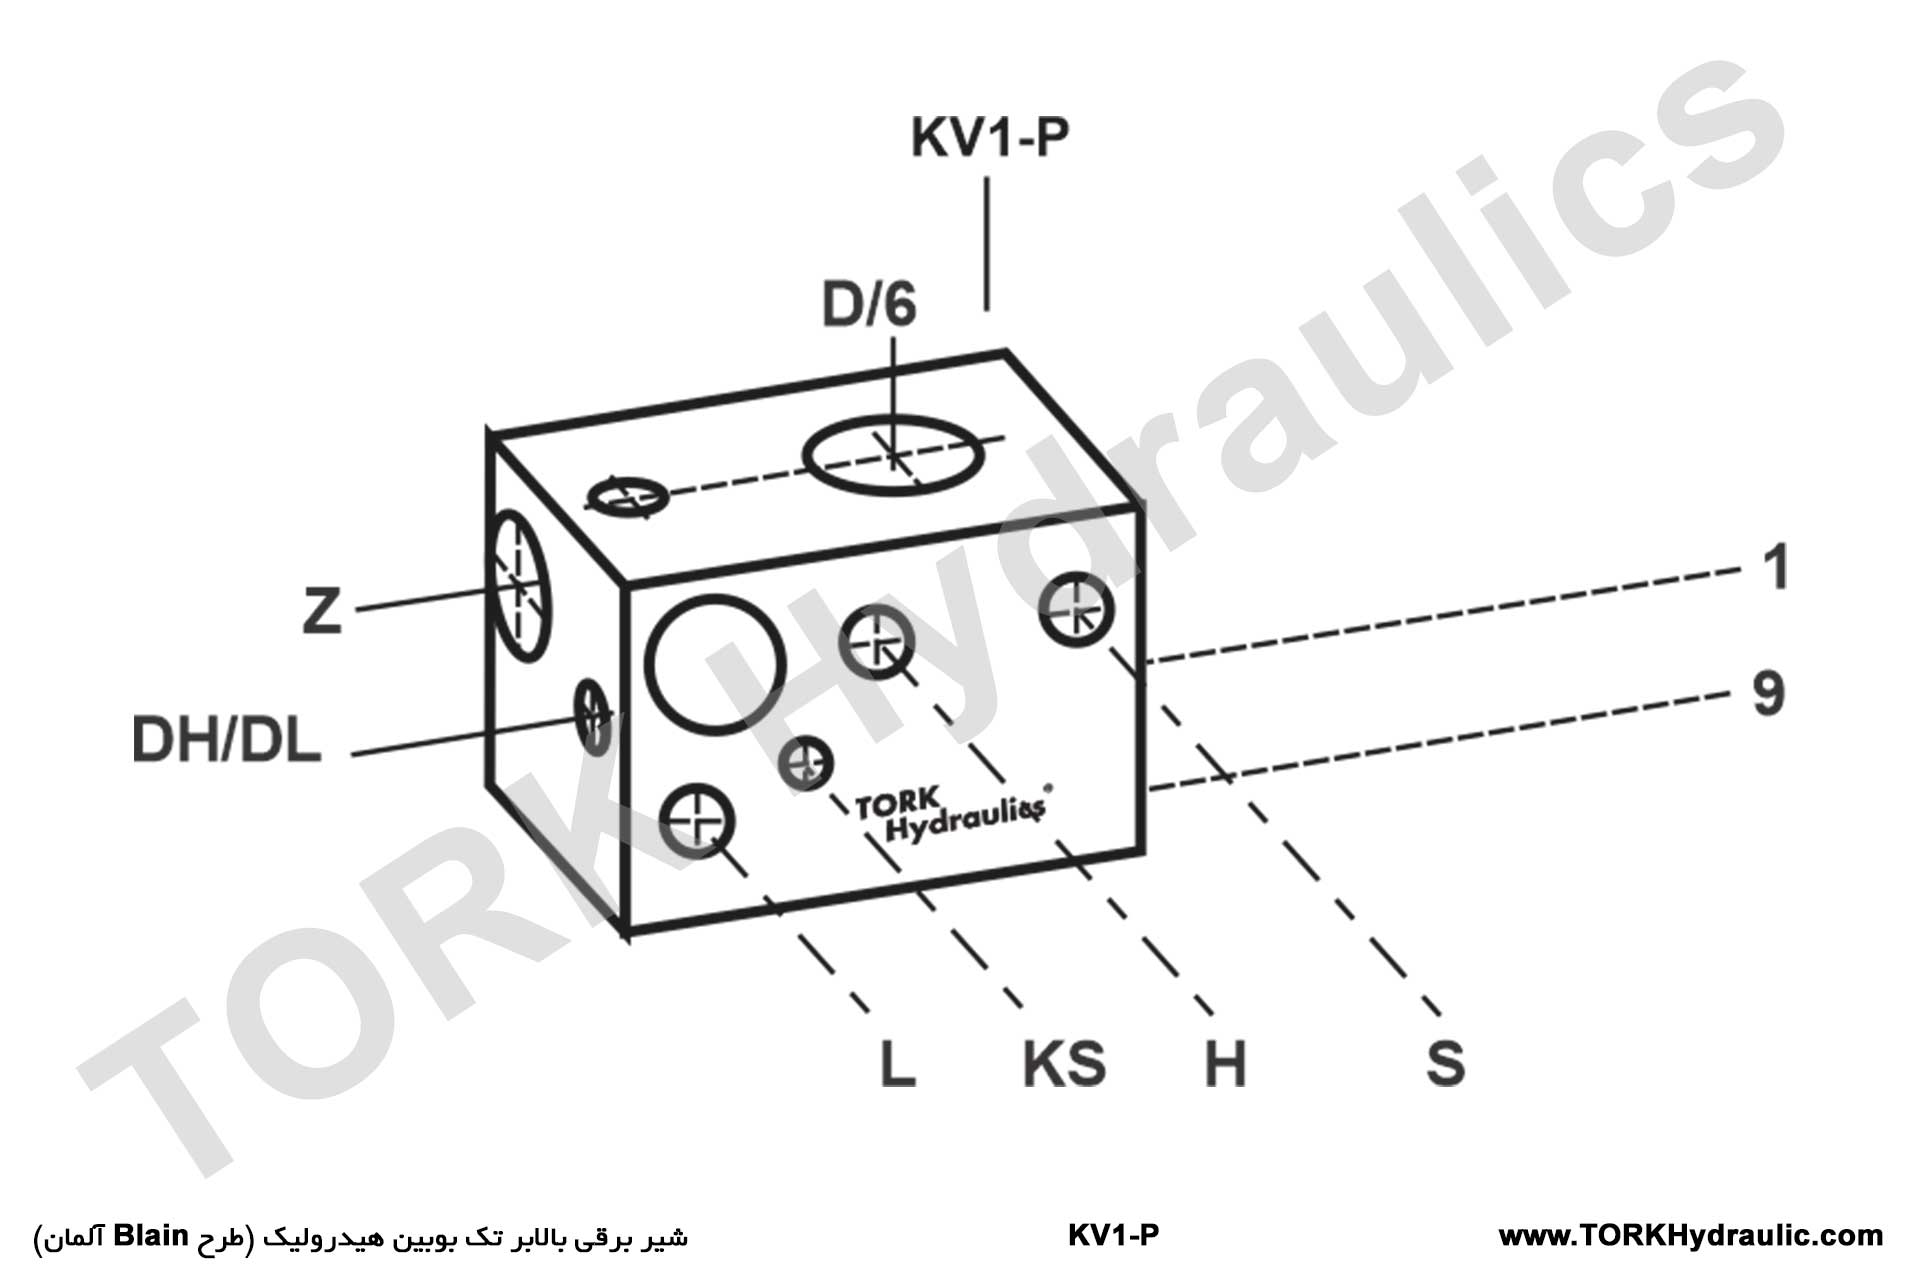 Map of single-coil solenoid valve Blain design made by Tork Hydraulic